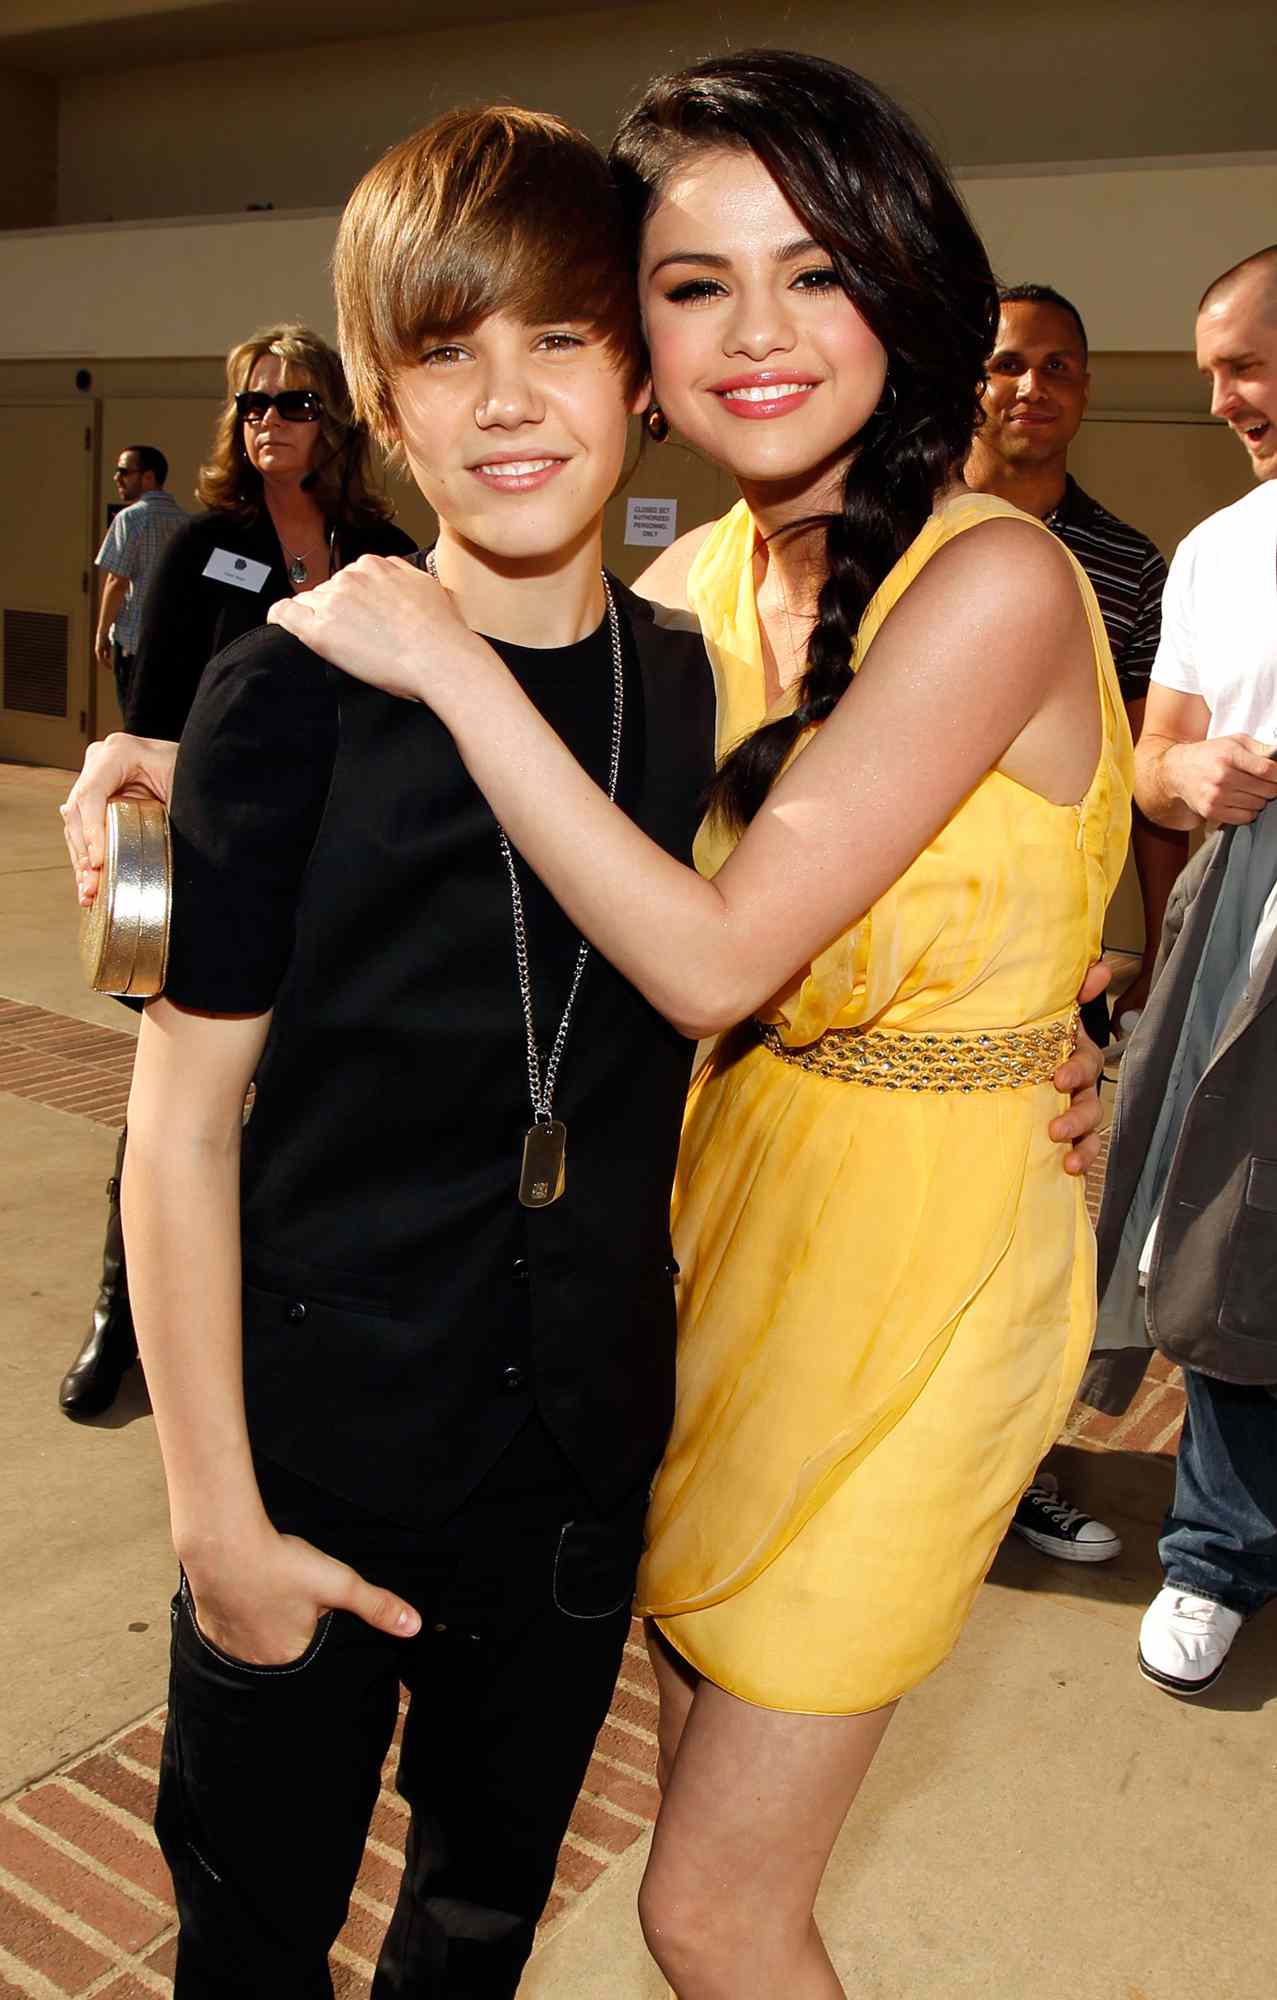 Justin Bieber and Selena Gomez's Relationship A Look Back